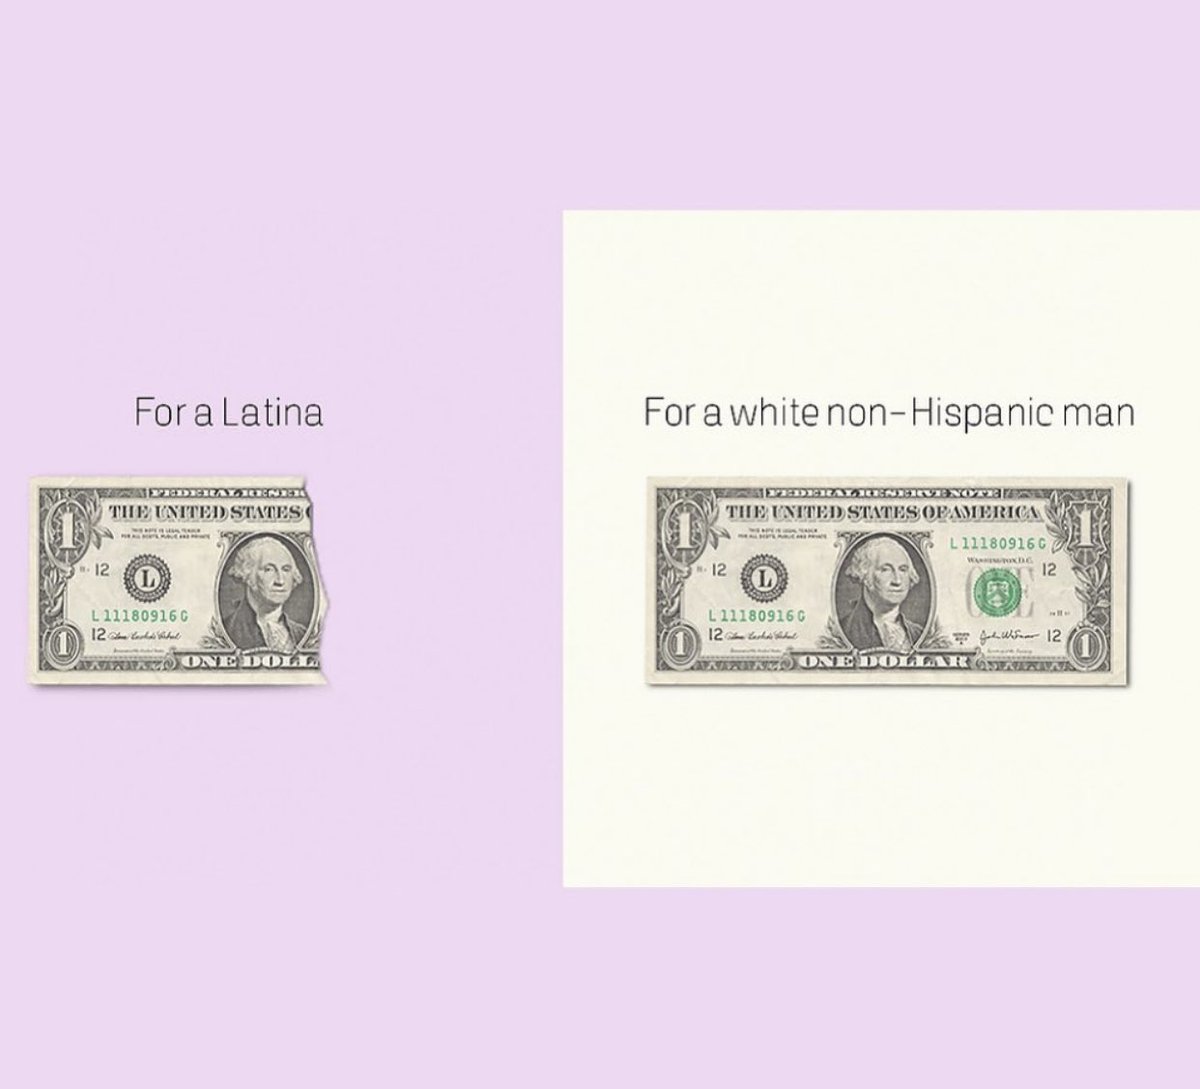 Latinas nationally are paid 57 cents for every $1.00. This doesn’t even account for Latinas who lost jobs during the pandemic. 

Did you know Latinas lose over $1.1. Million over the course of her career? 

Everyone deserves equal pay for equal work. #LatinaEqualPayDay